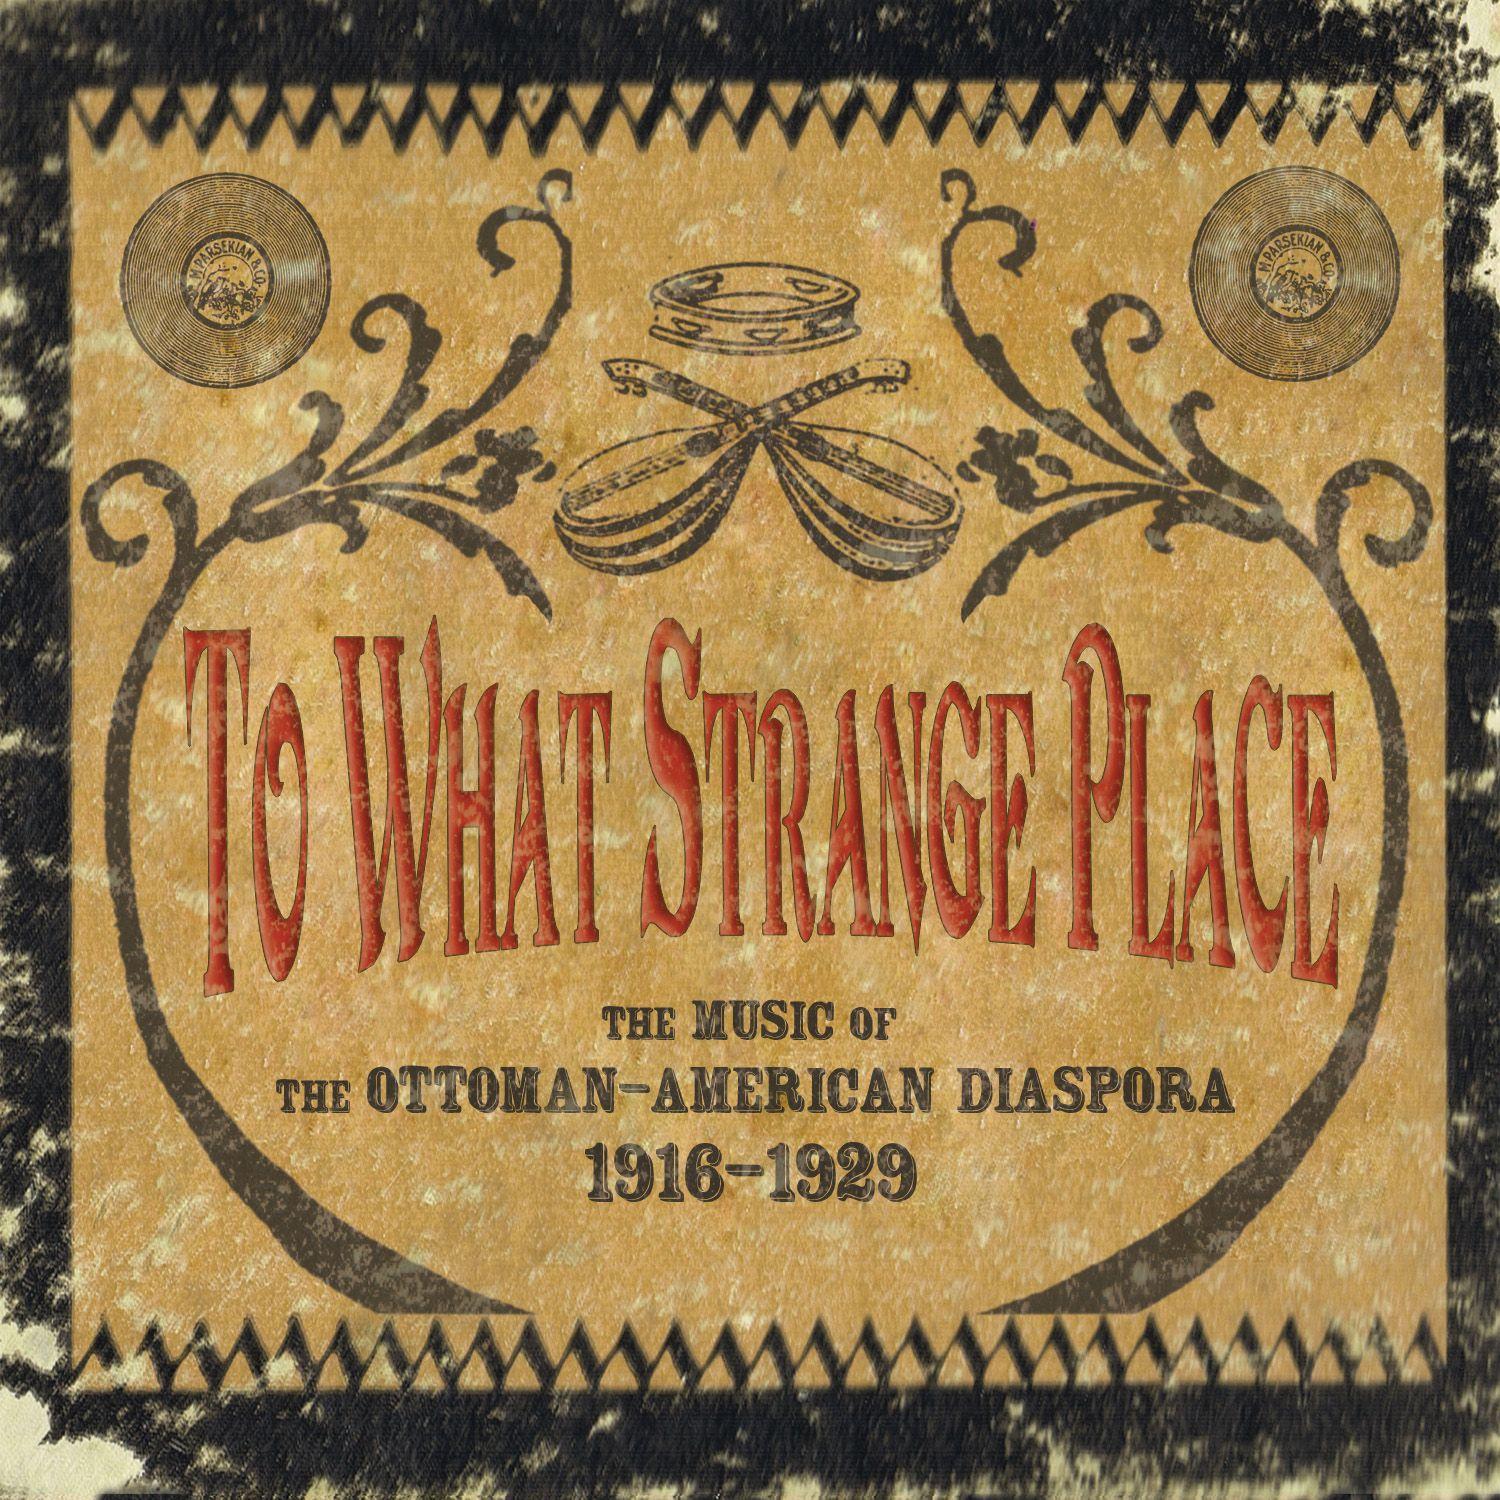 To What Strange Place, The Music Of The Ottoman American Diaspora